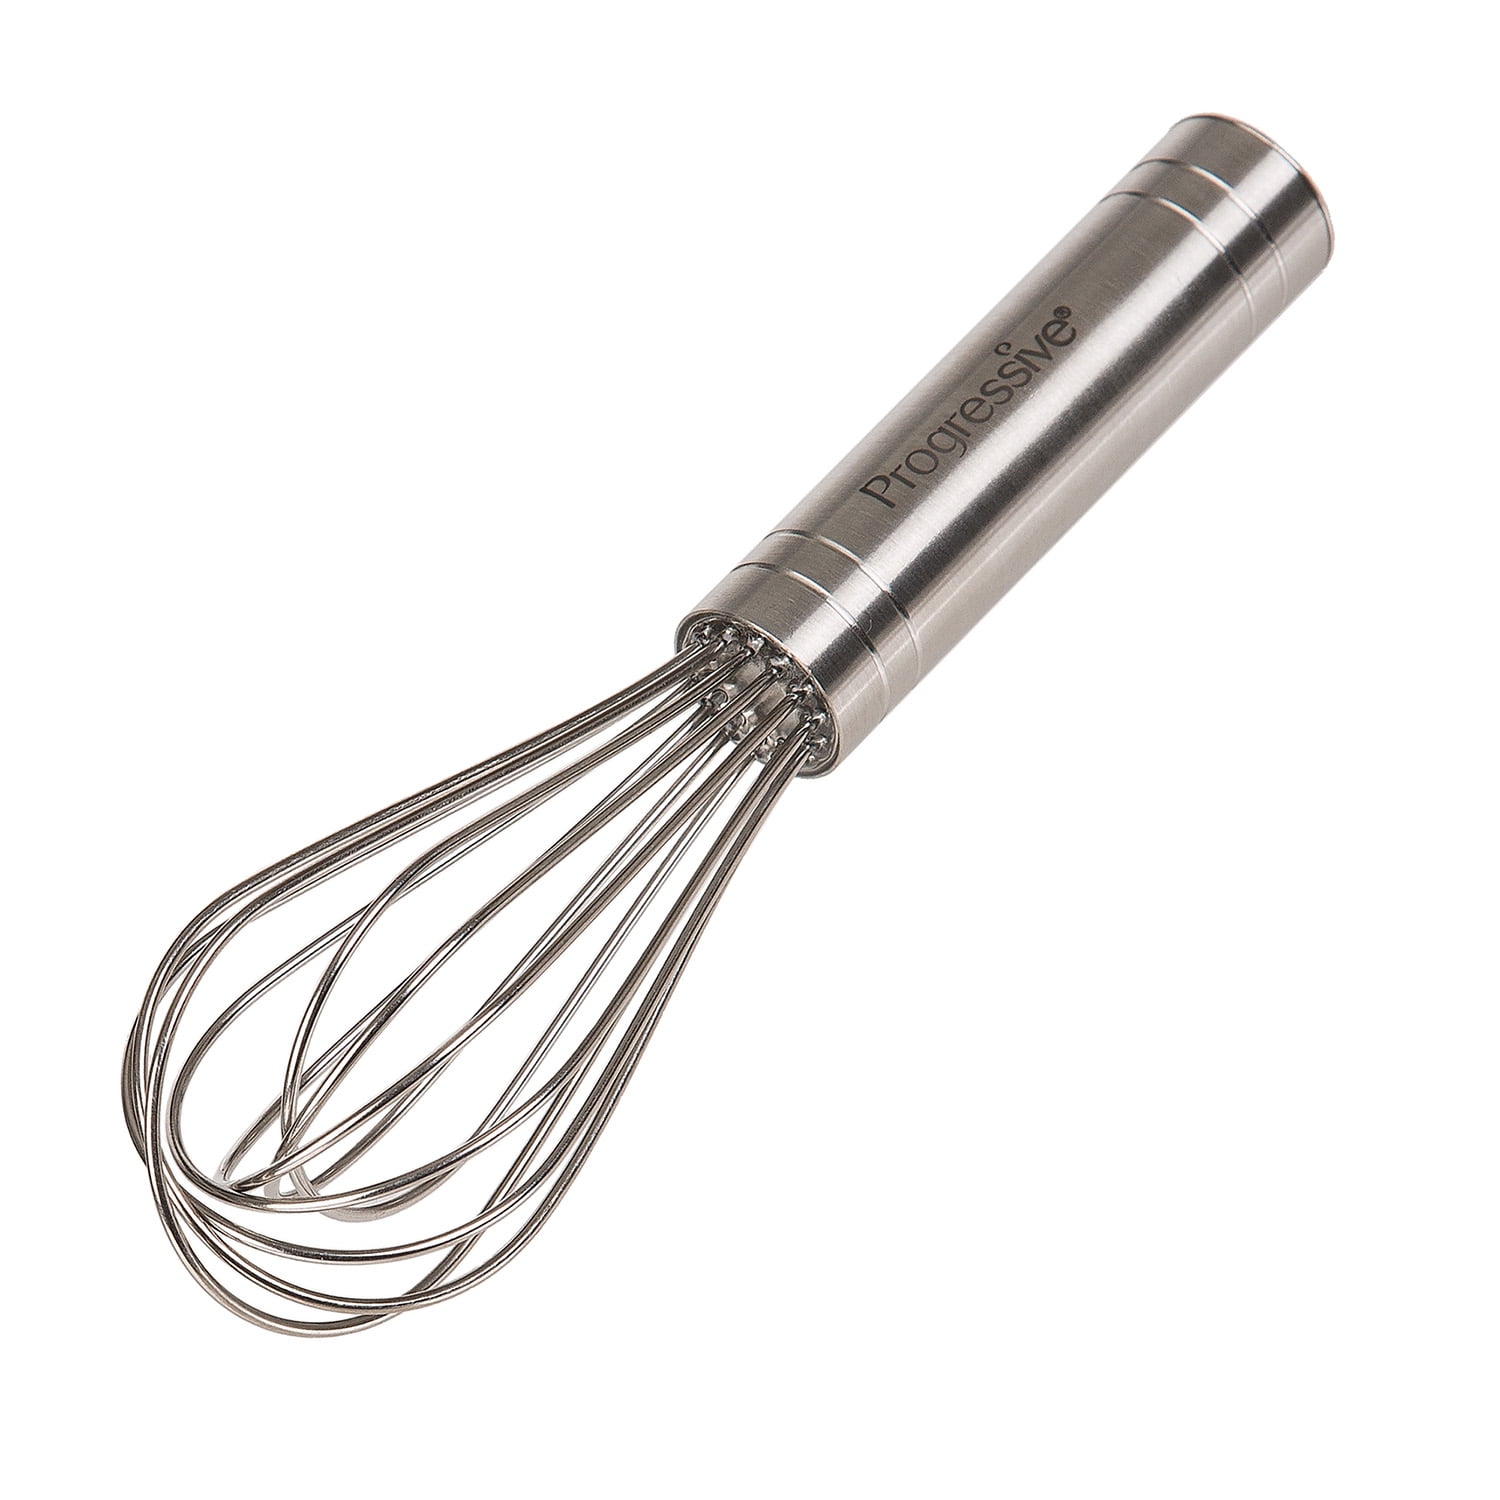 stainless steel balloon galaxy spring whisk